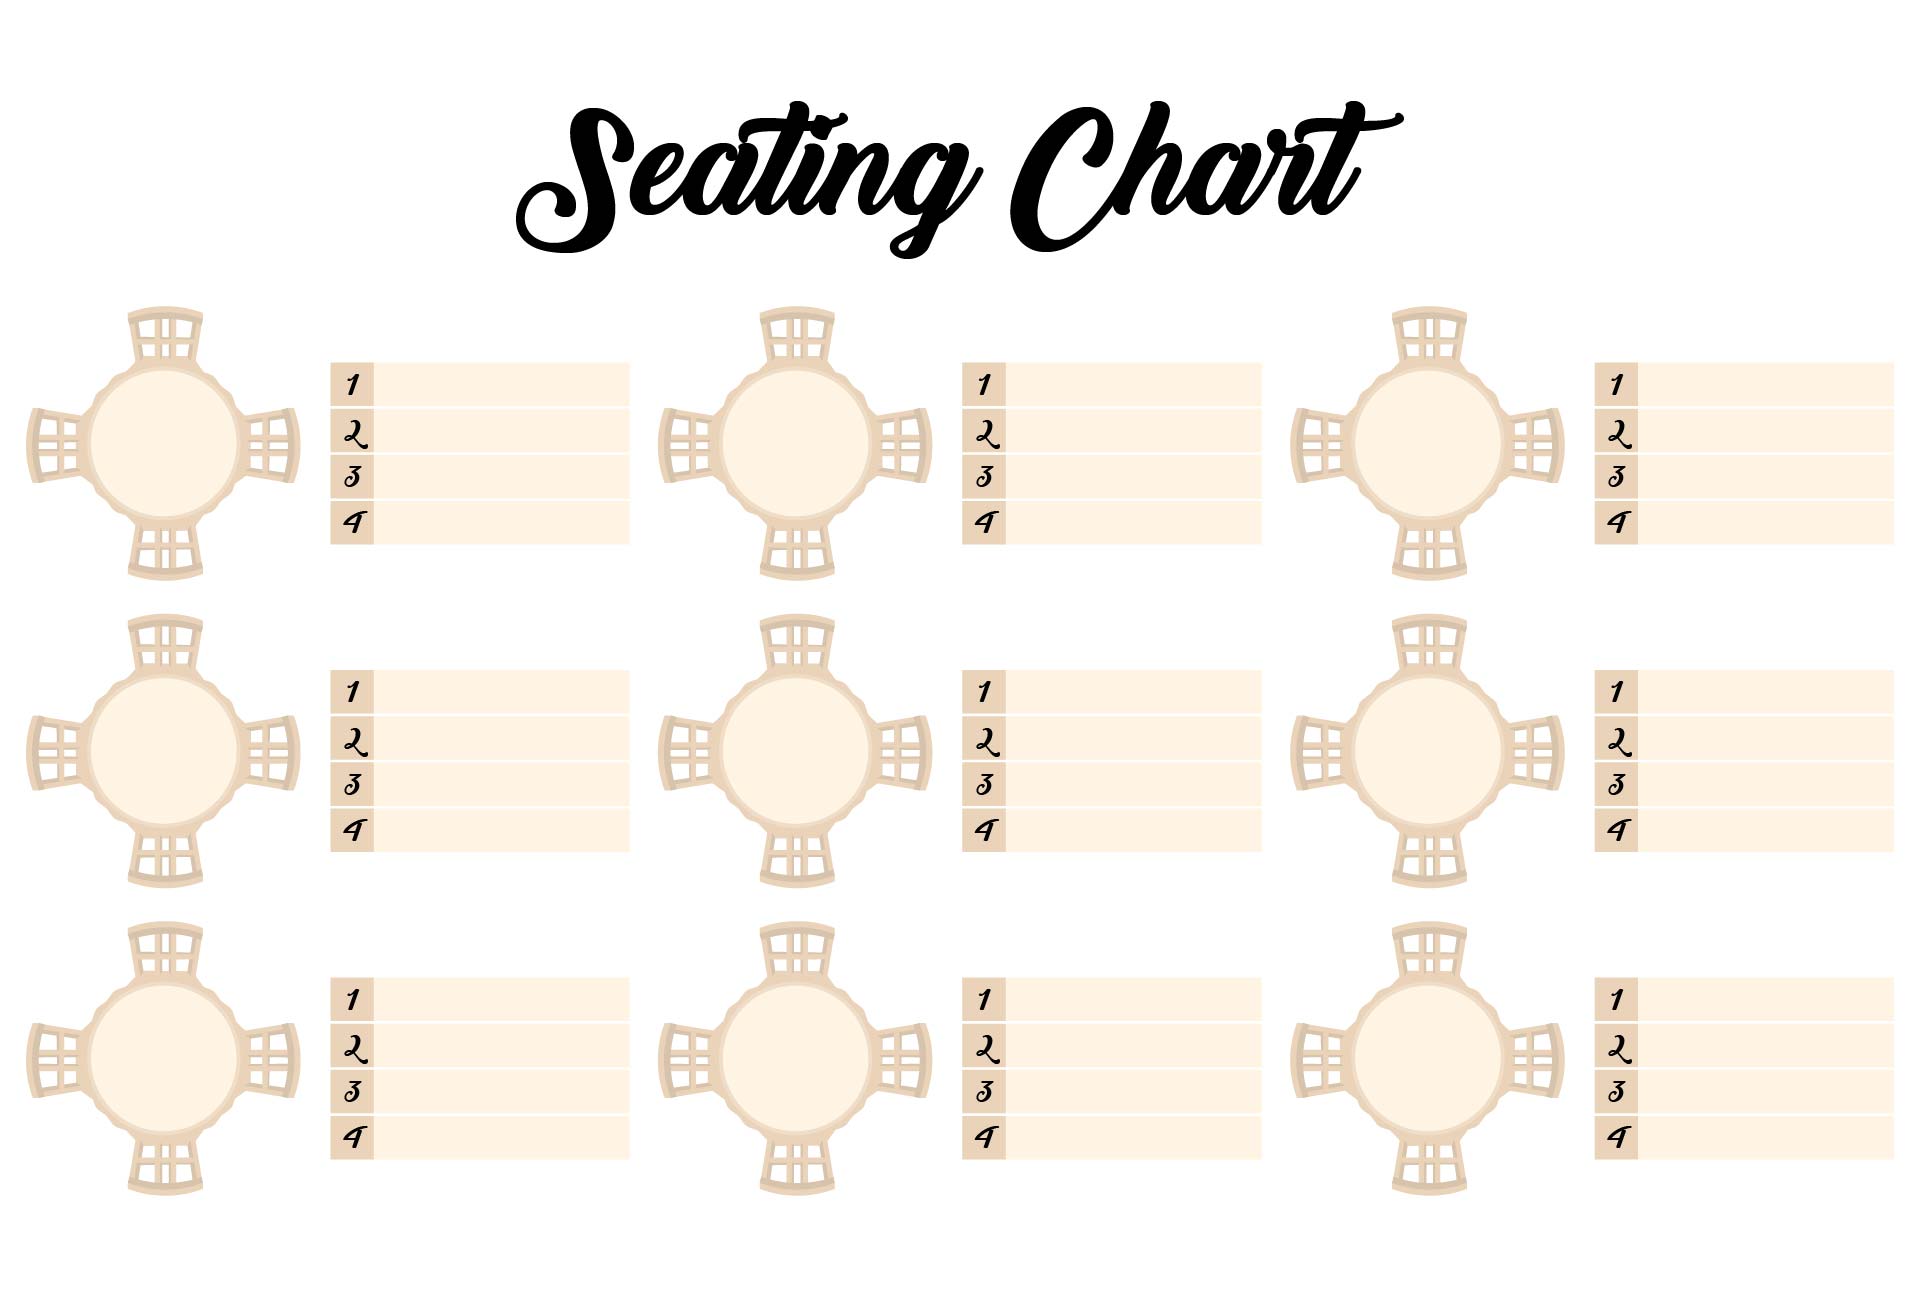 Wedding Table Seating Chart Template